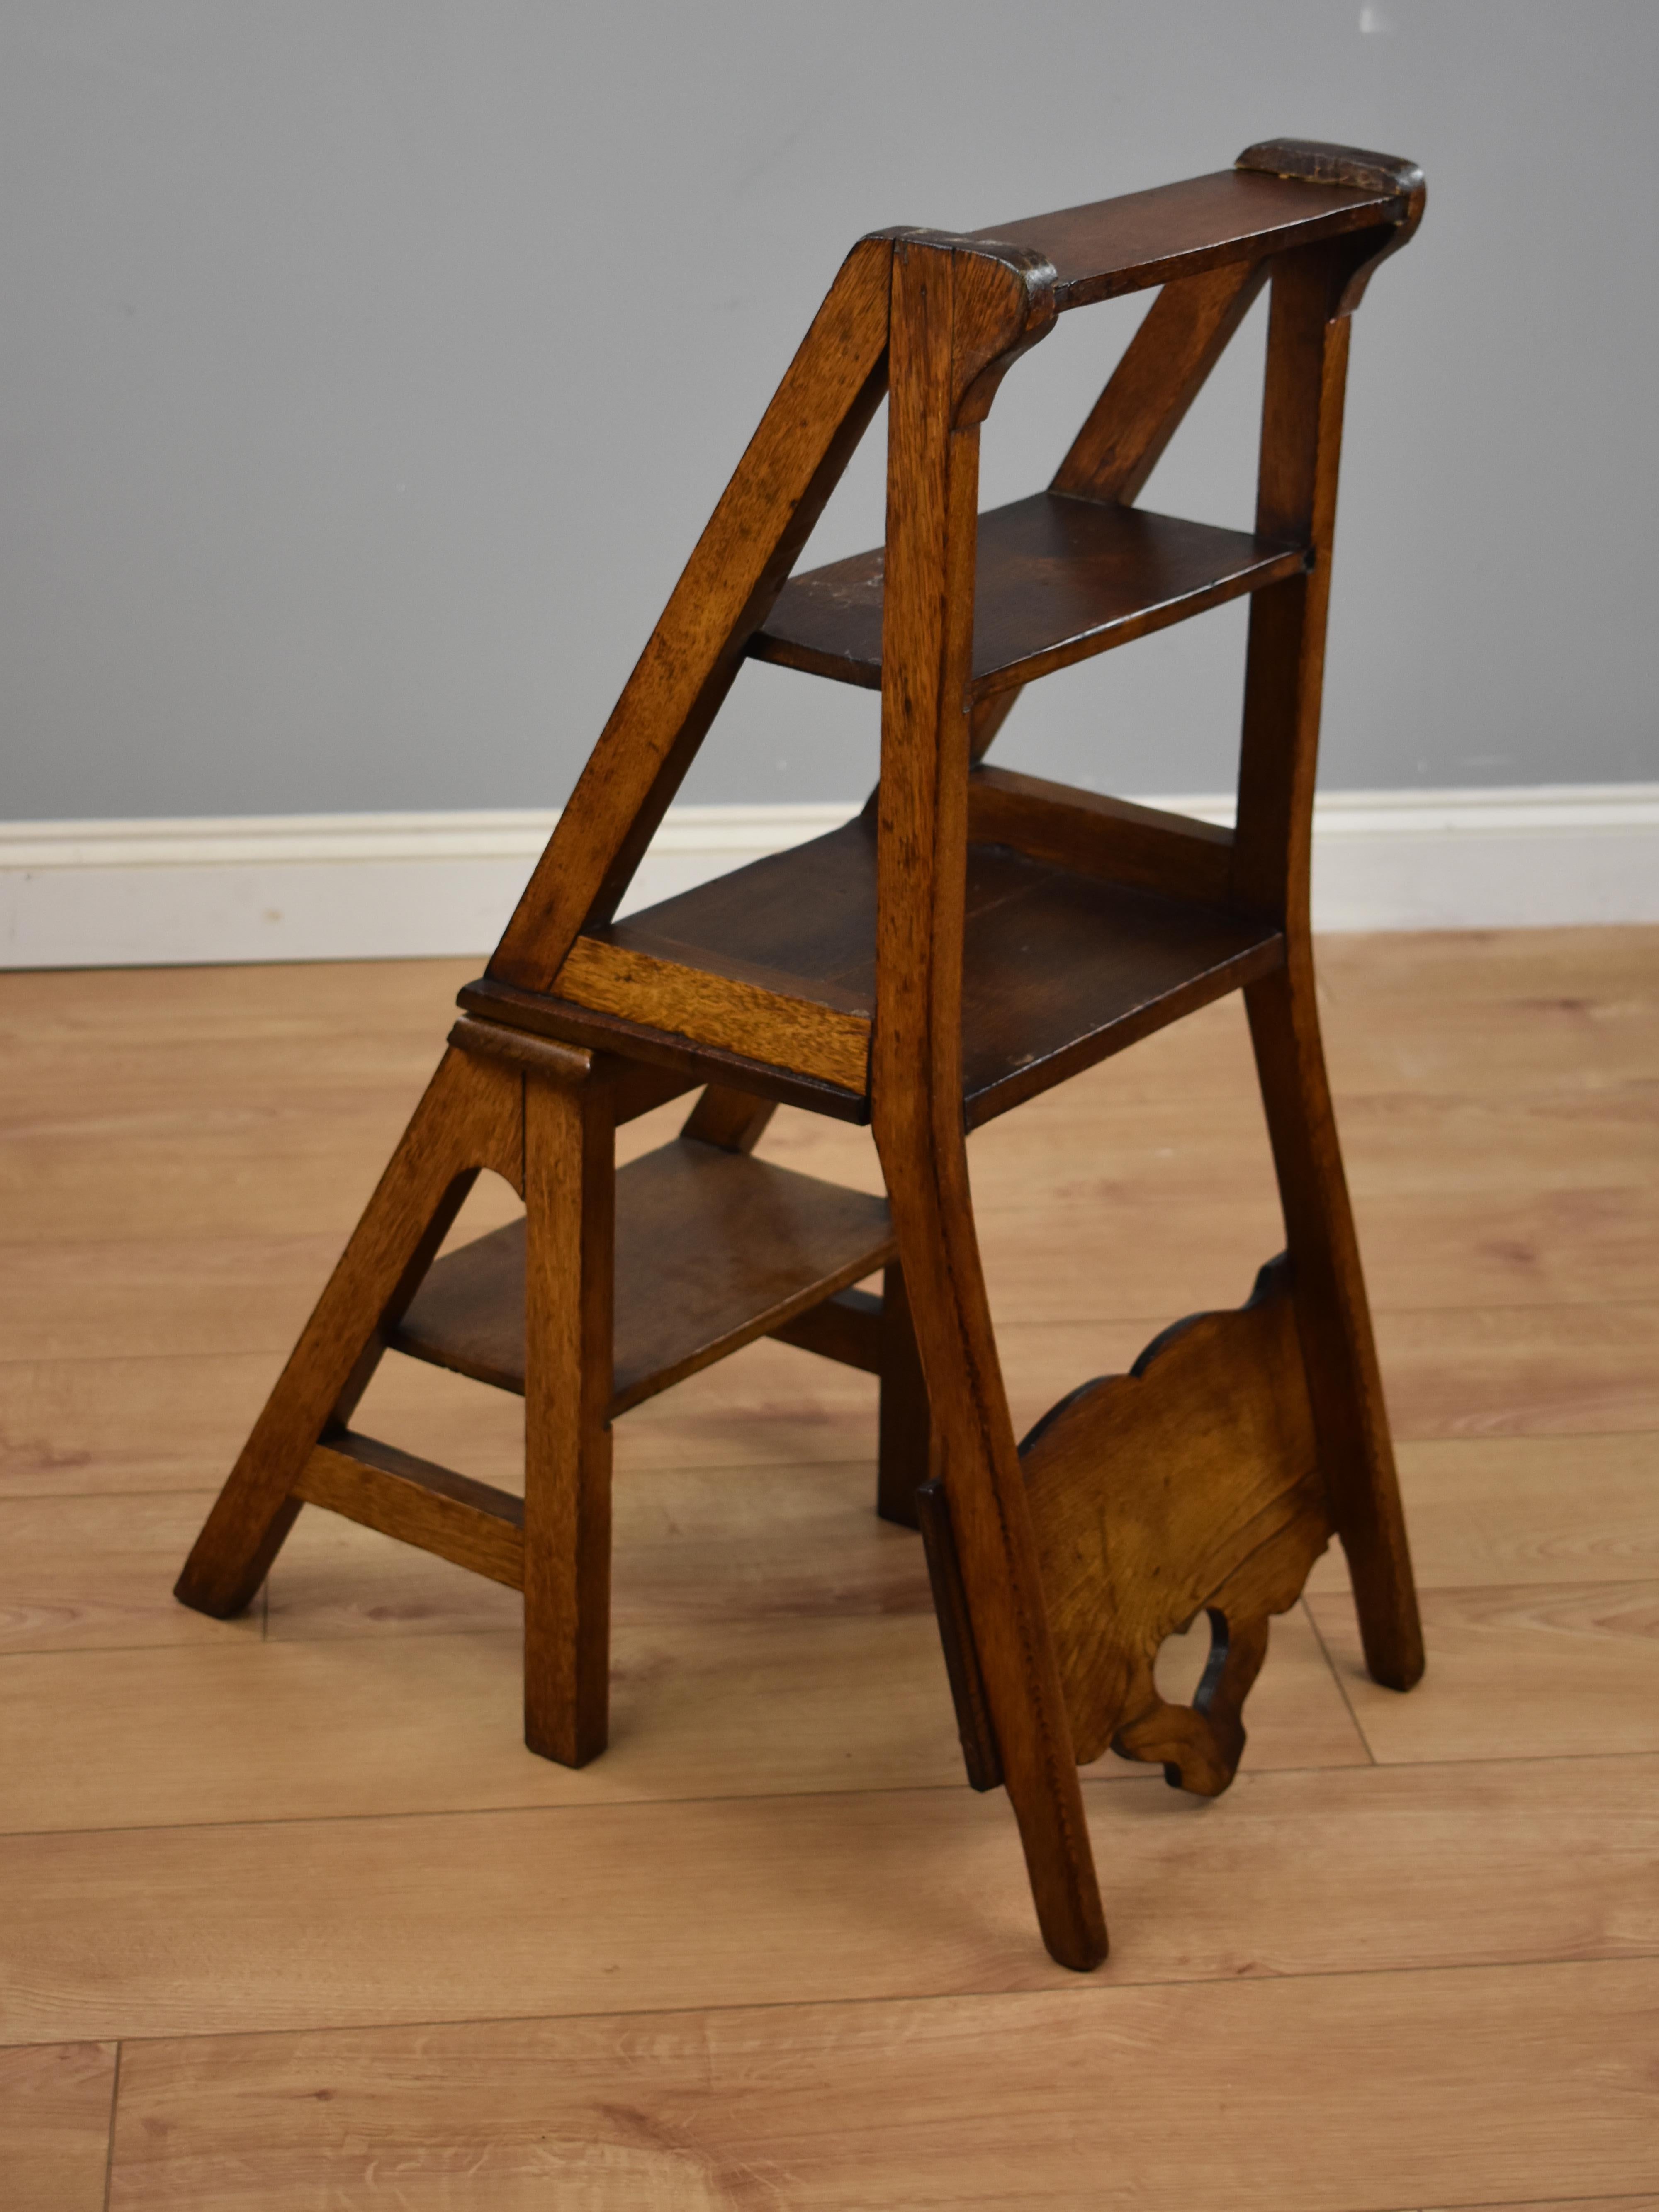 Arts & Crafts Metamorphic chair / library steps with a pierced motif to the back, opens when the locking rod to the side is lifted into a sturdy well constructed set steps. Decorative and functional item.